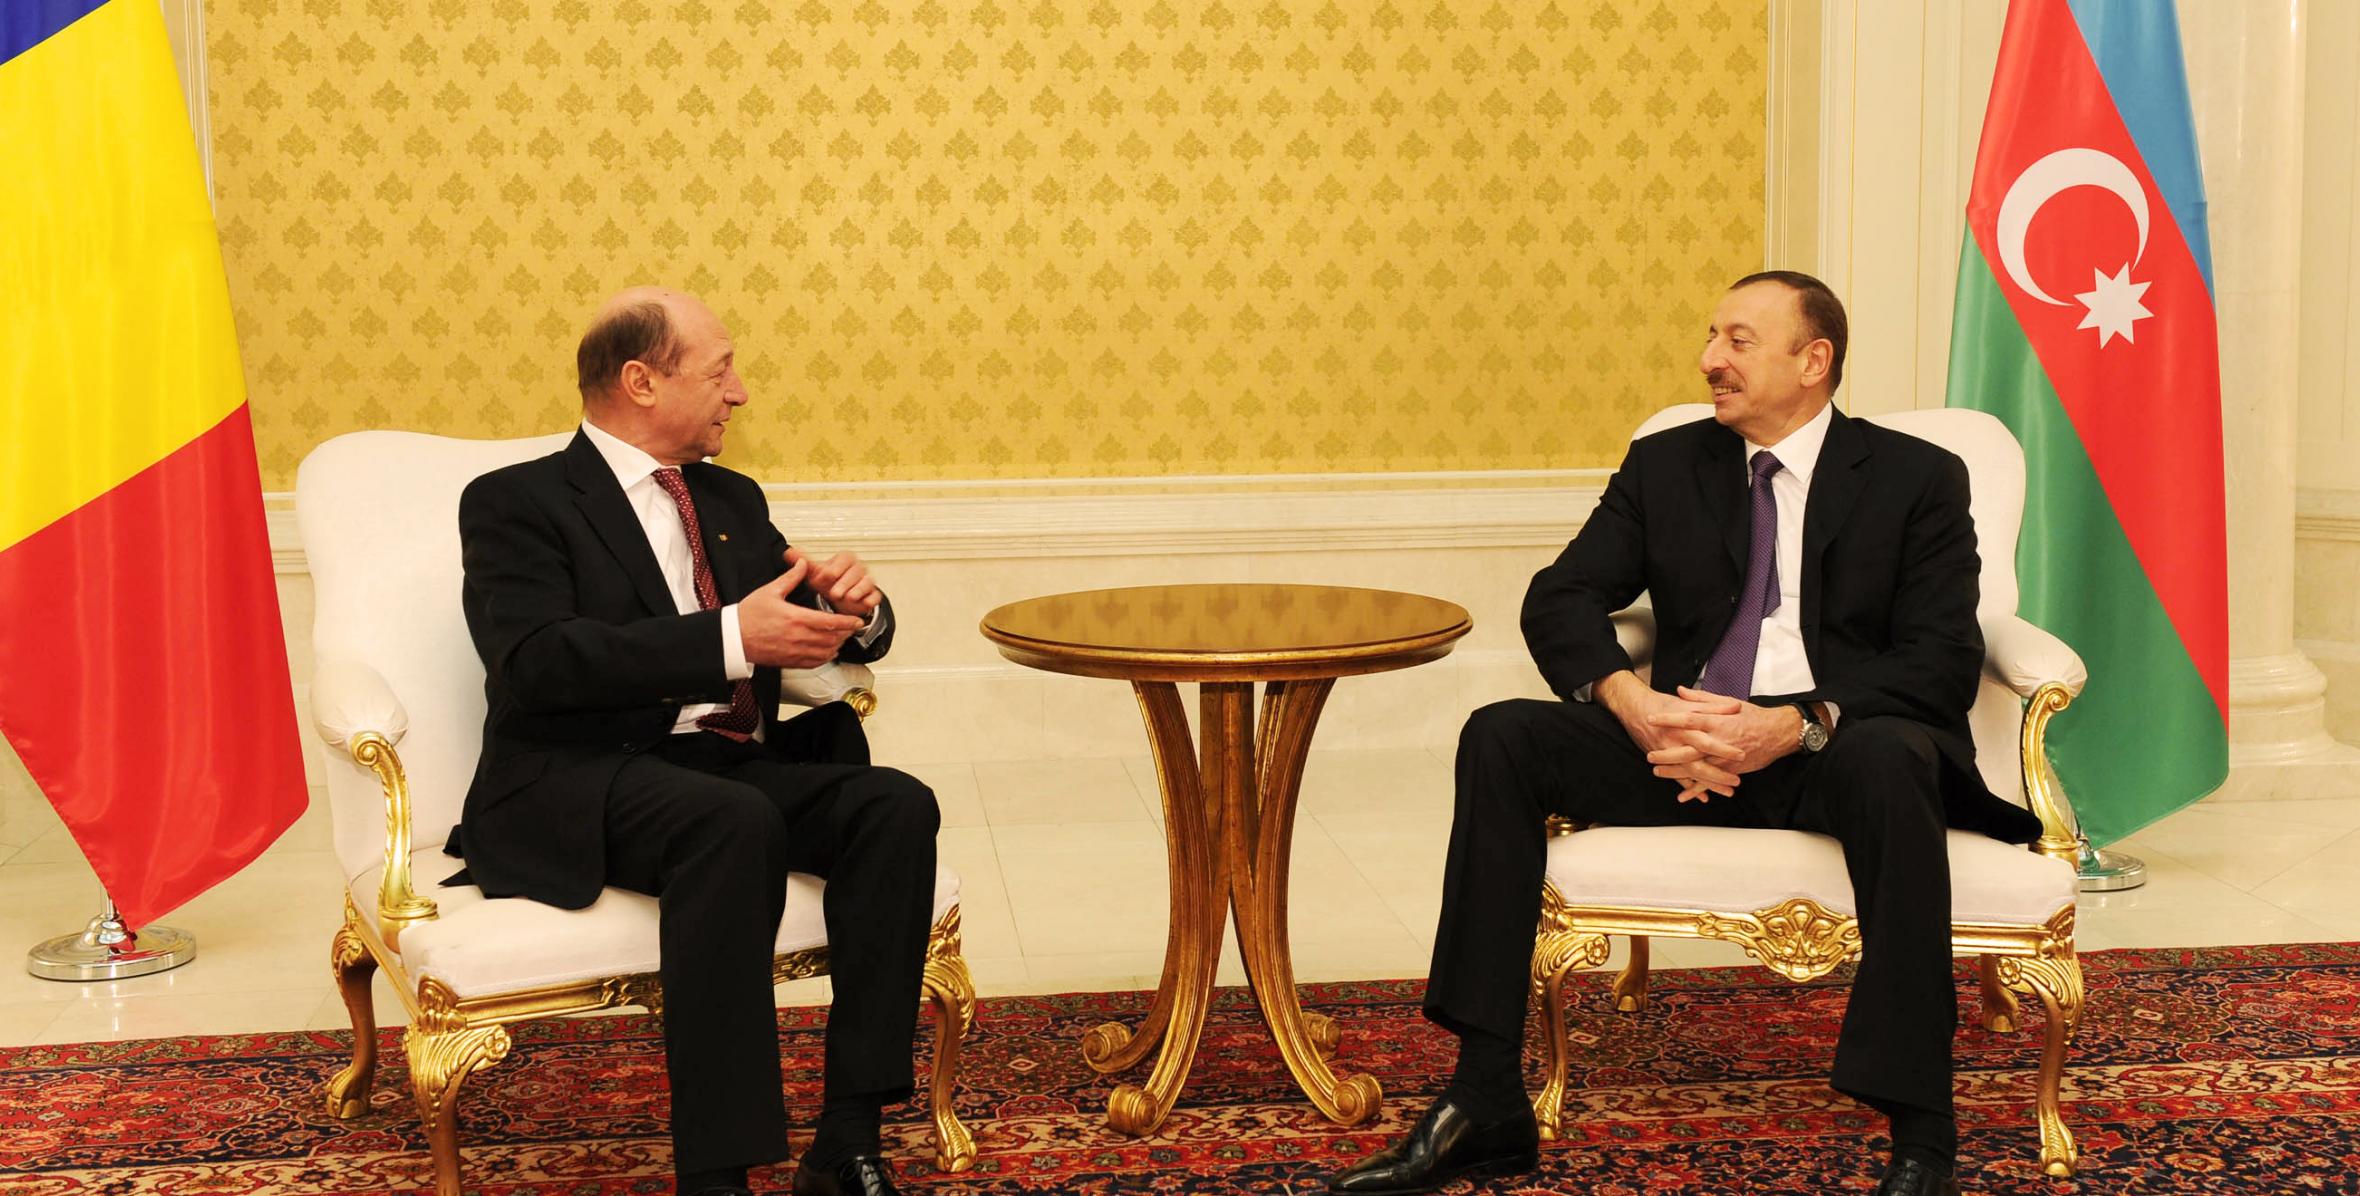 Ilham Aliyev held a private meeting with President of Romania Traian Băsescu